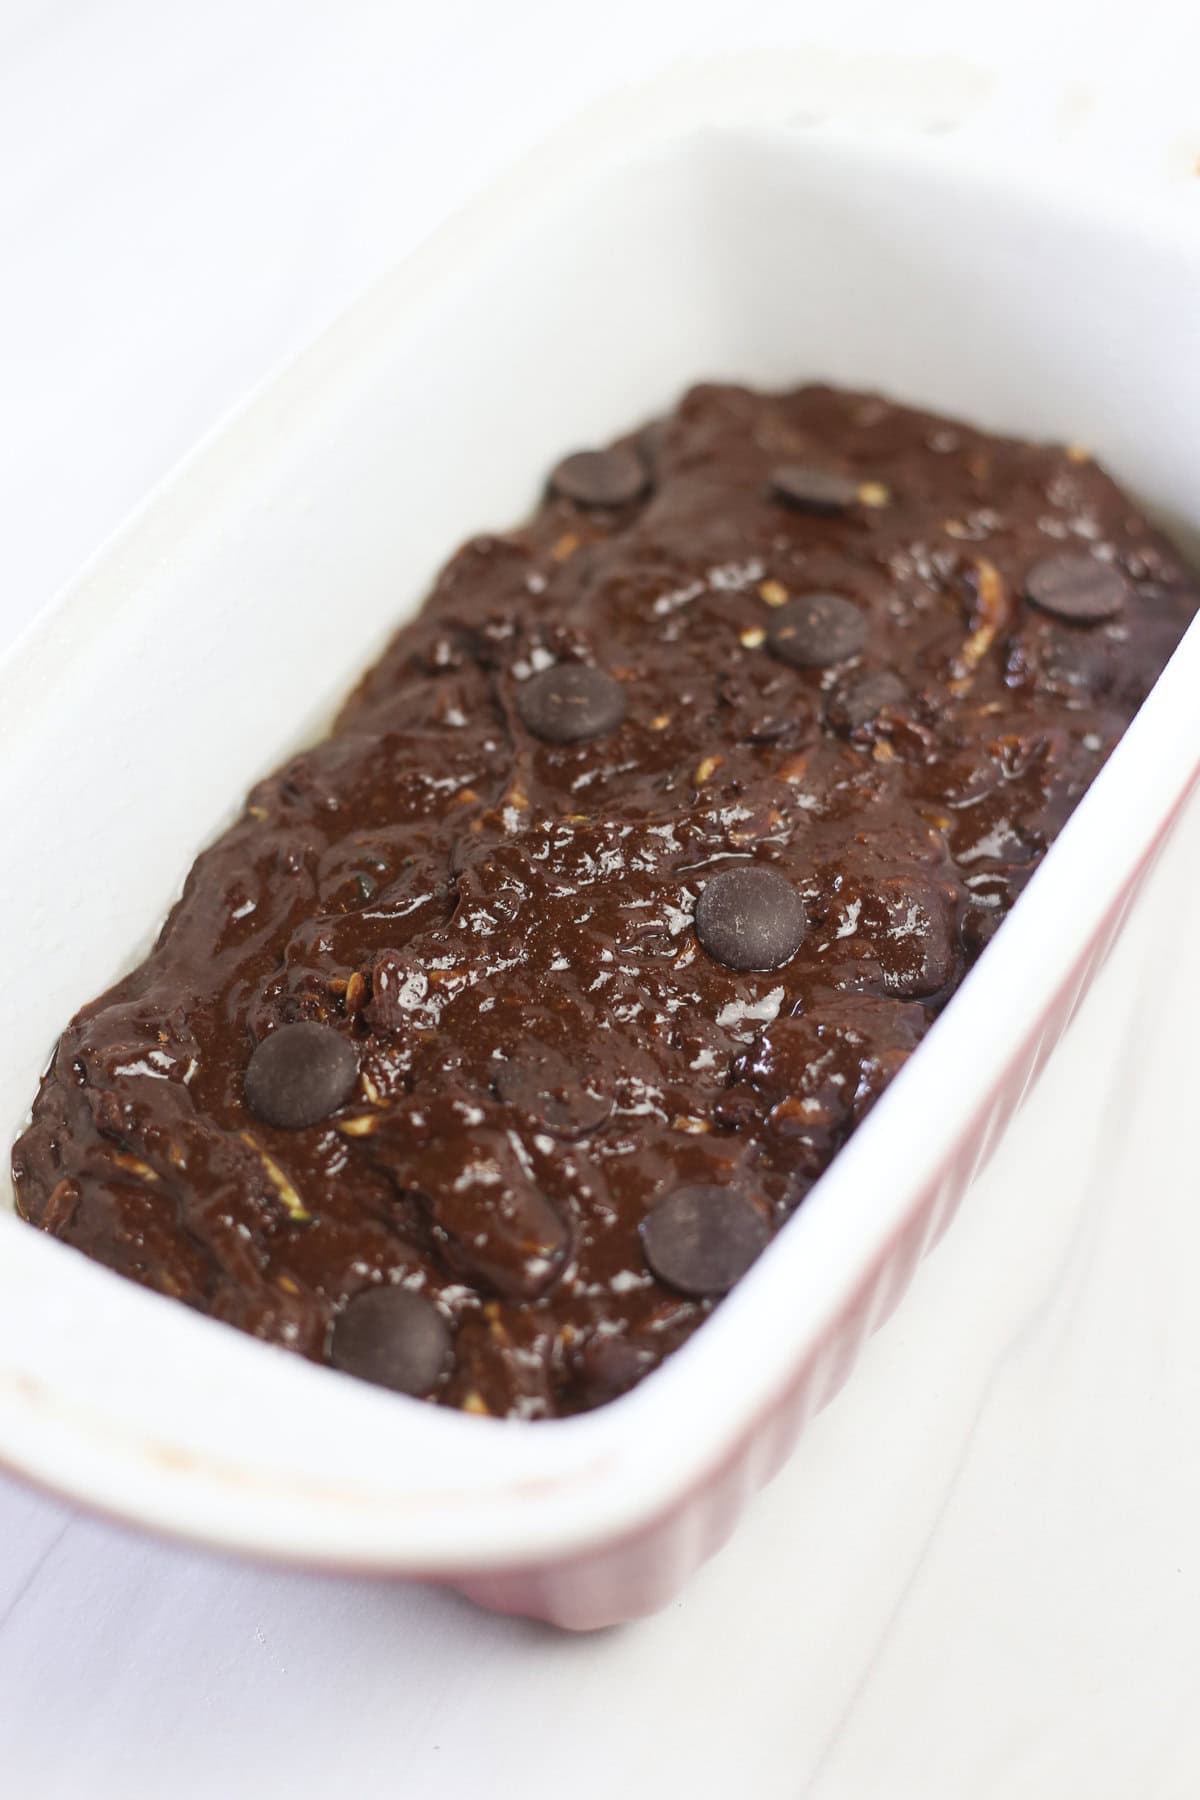 Double chocolate zucchini bread batter in a loaf pan.